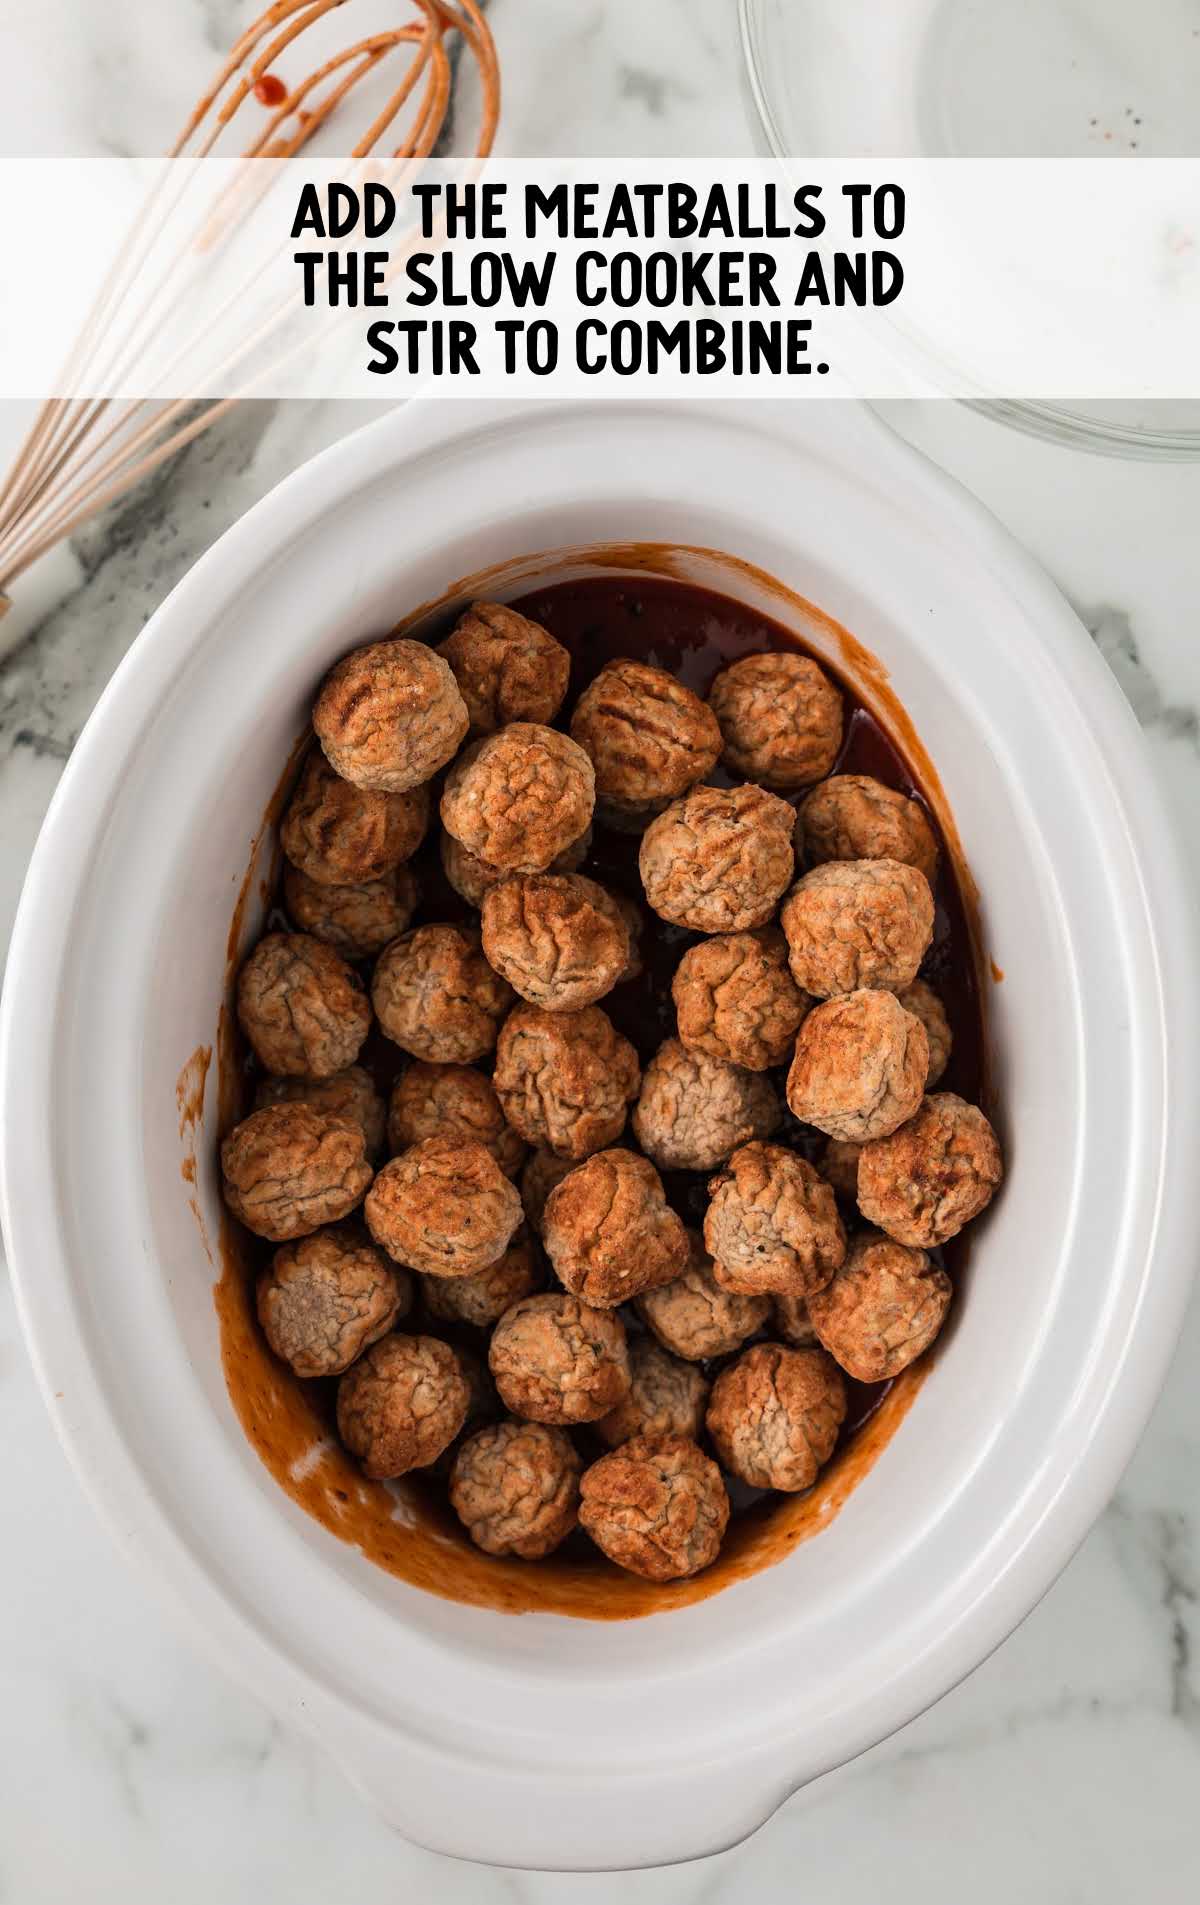 meatballs being added to the crockpot